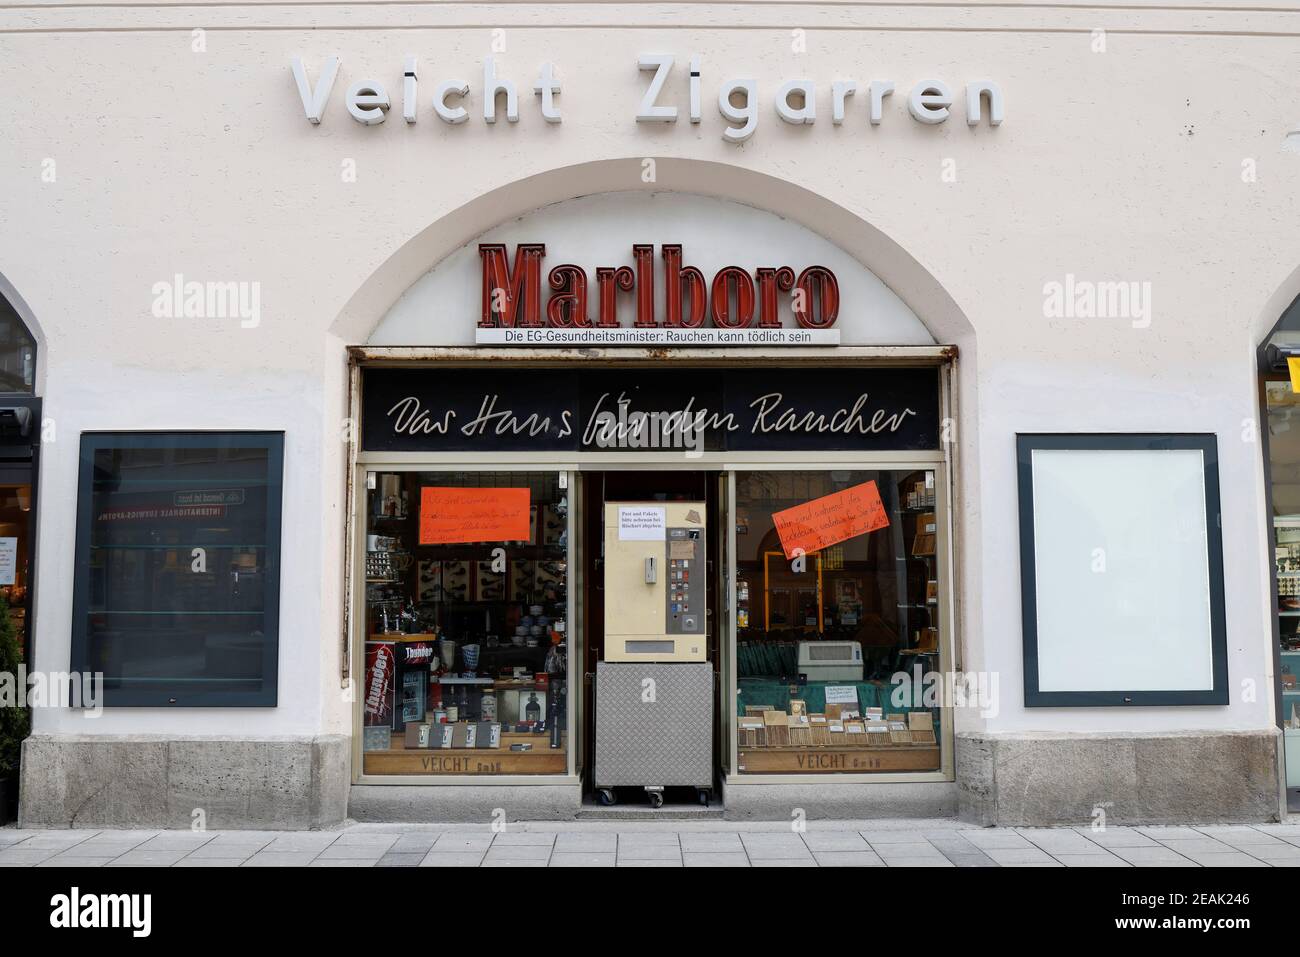 'Veicht Zigarren' store is seen closed due to the coronavirus disease (COVID-19) pandemic in Munich, Germany, February 5, 2021. Picture taken February 5, 2021. REUTERS/Michaela Rehle Stock Photo